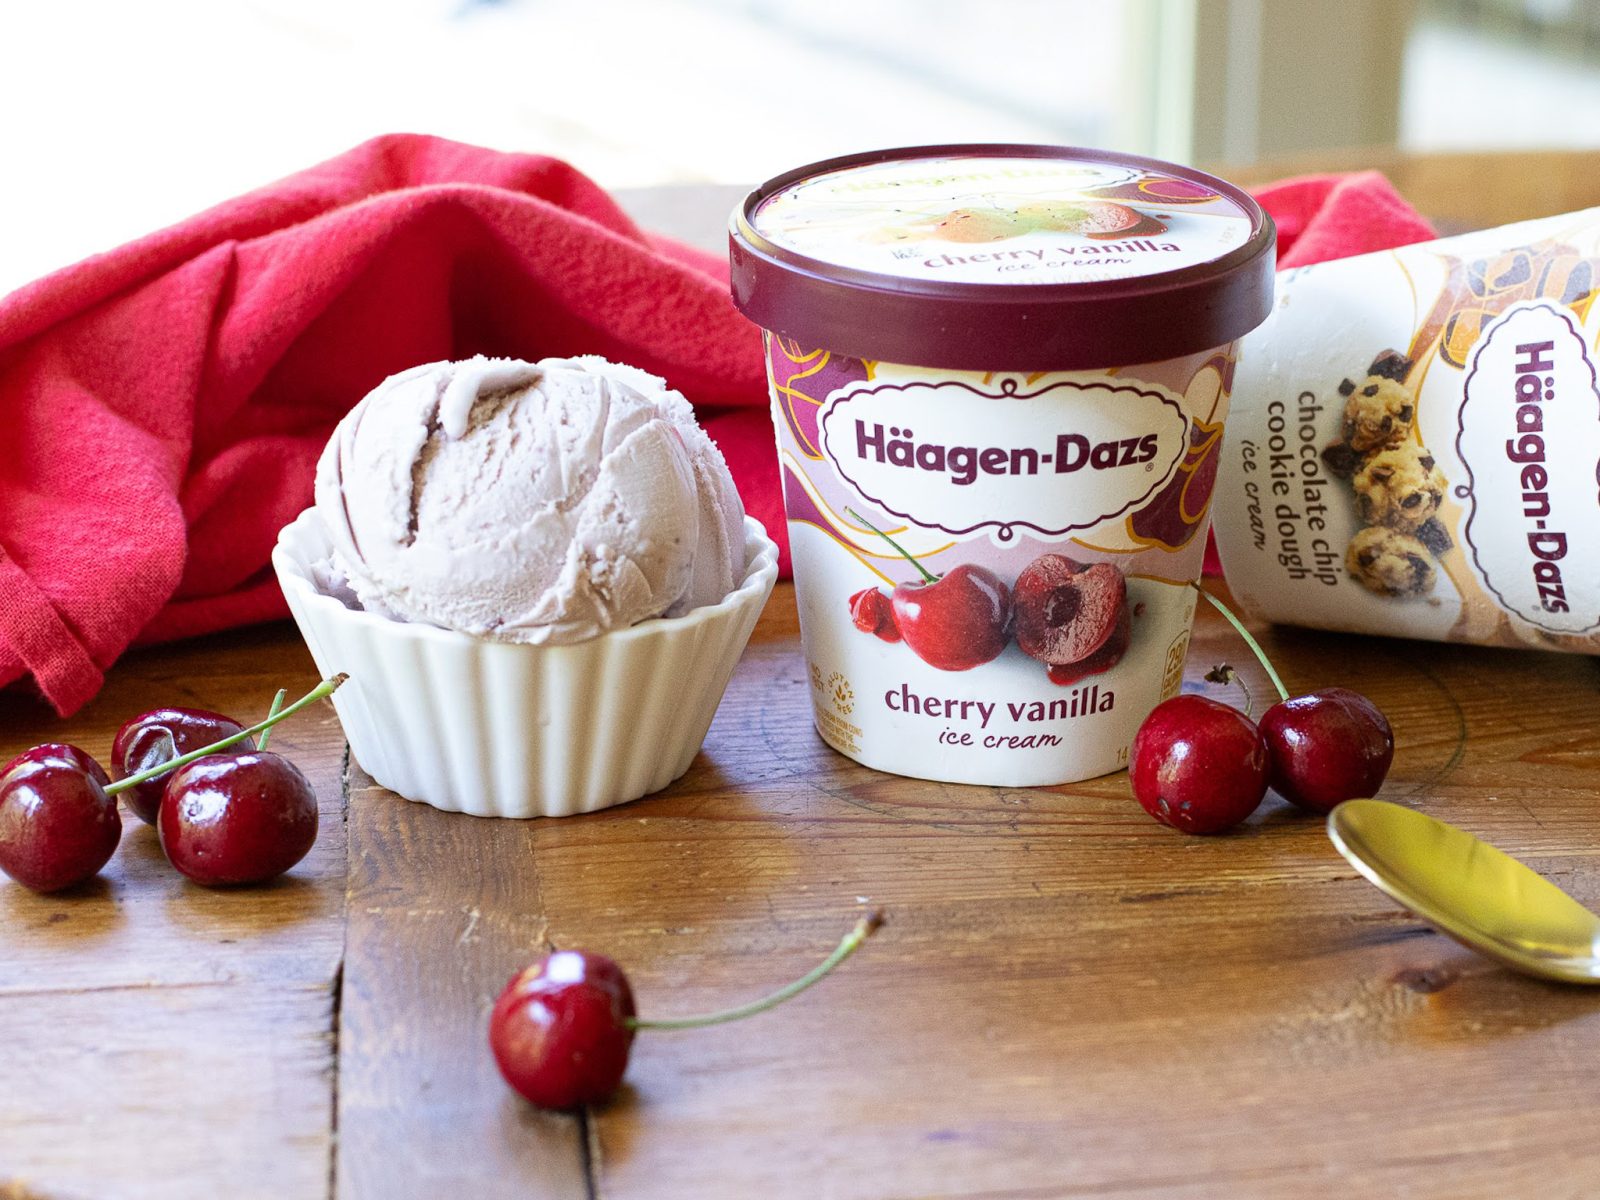 Get Haagen-Dazs Ice Cream For As Low As $2.79 At Kroger (Regular Price $4.99)